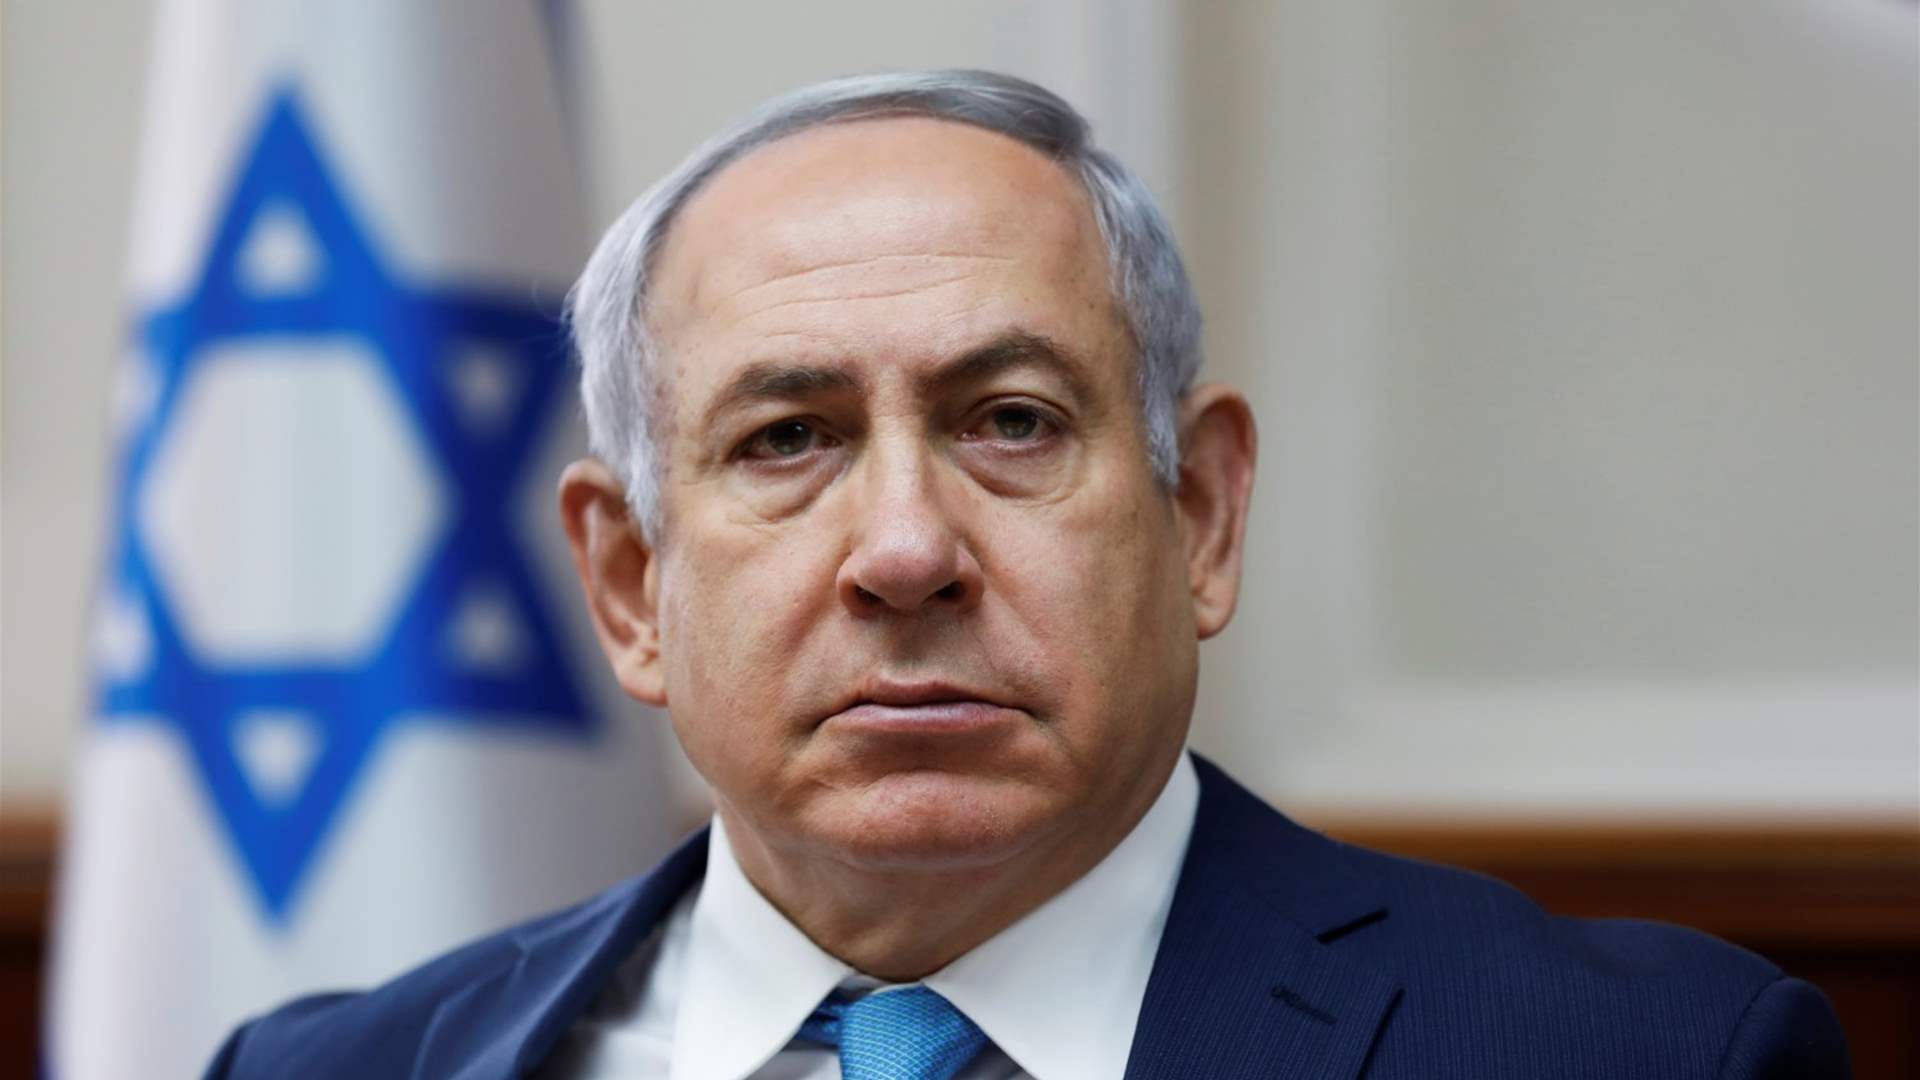 Al Jazeera, citing Israeli Broadcasting Corporation: Netanyahu rejects ultimately Hamas&#39; conditions for a prisoner exchange deal